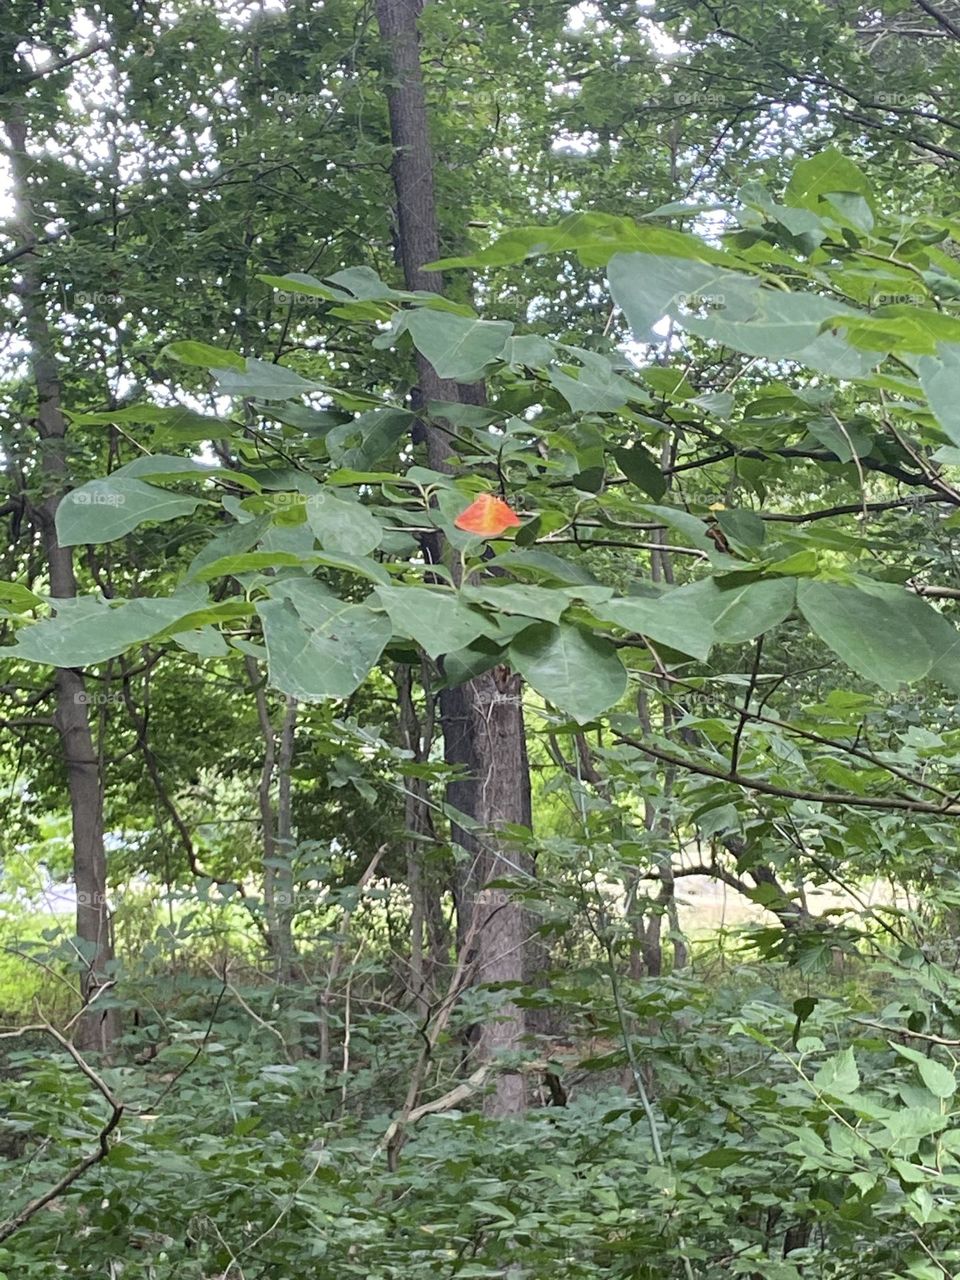 One red leaf appears on an otherwise green tree. Nature is full of surprises. I took this photo while on a leisurely walk through the woods and fields of a beautiful park. Time out in the country grounds you and restores the soul. 